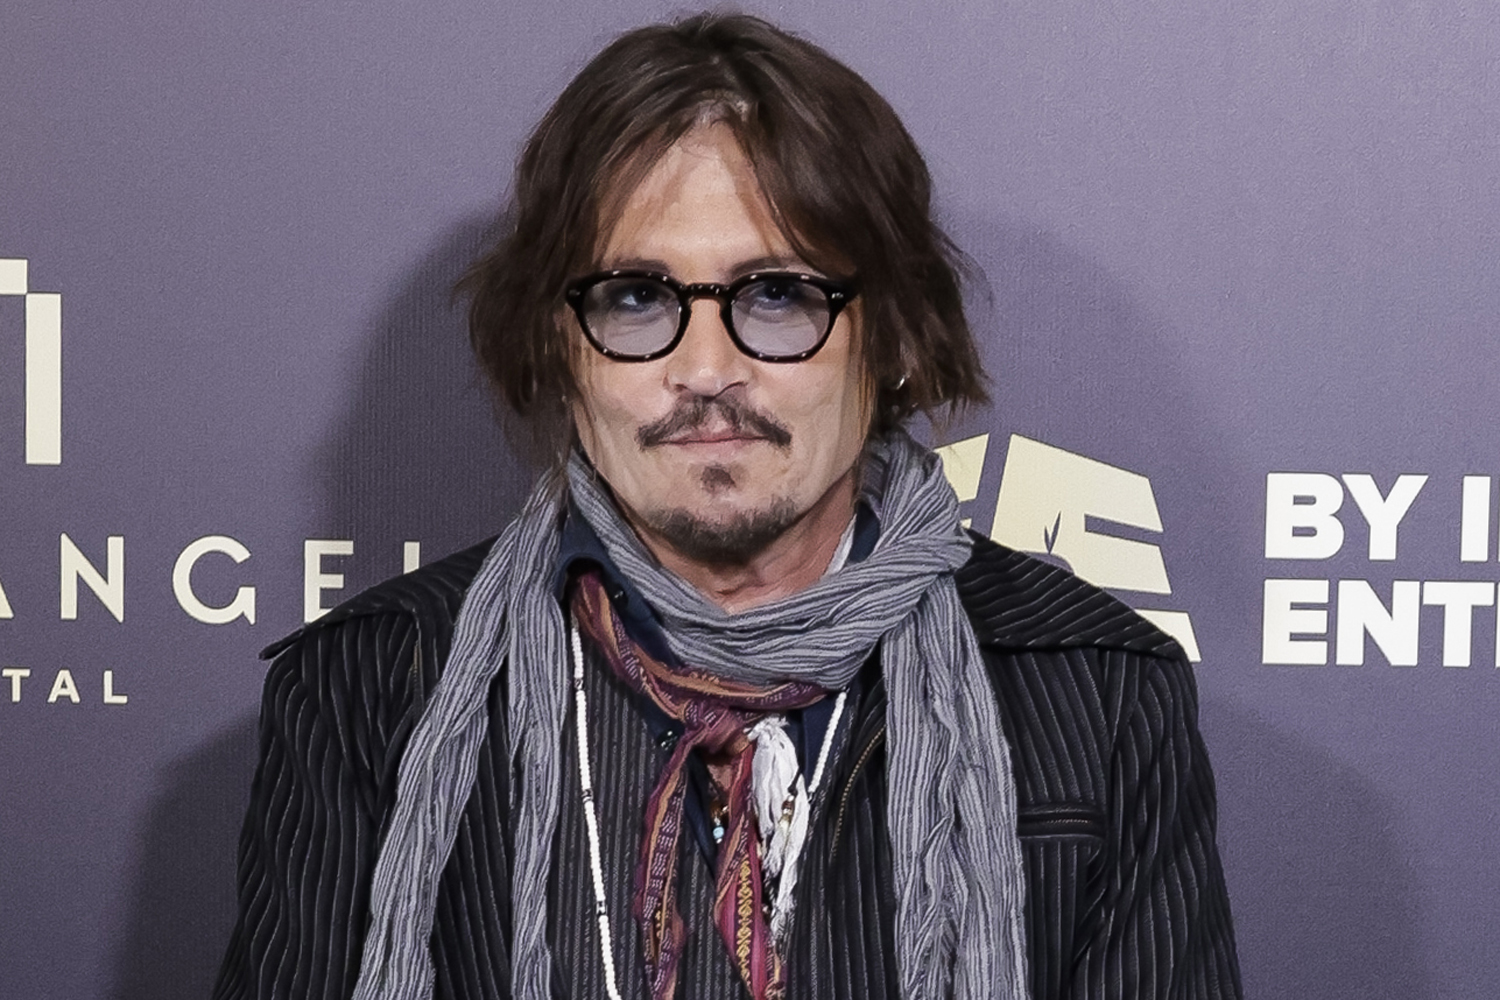 Famous USA Actor Johnny Depp